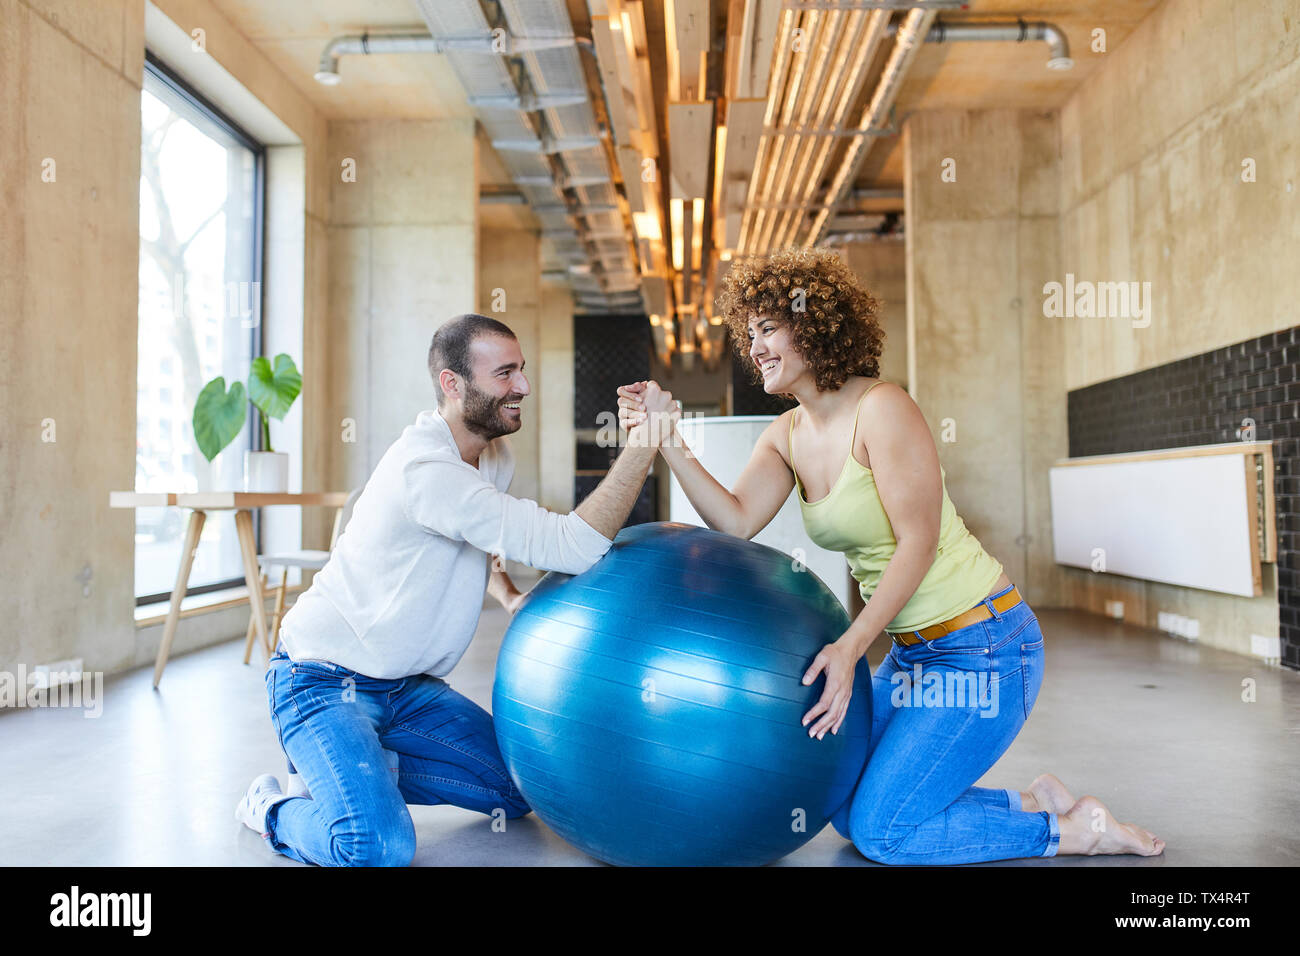 Happy man and woman arm wrestling on fitness ball in modern office Stock Photo